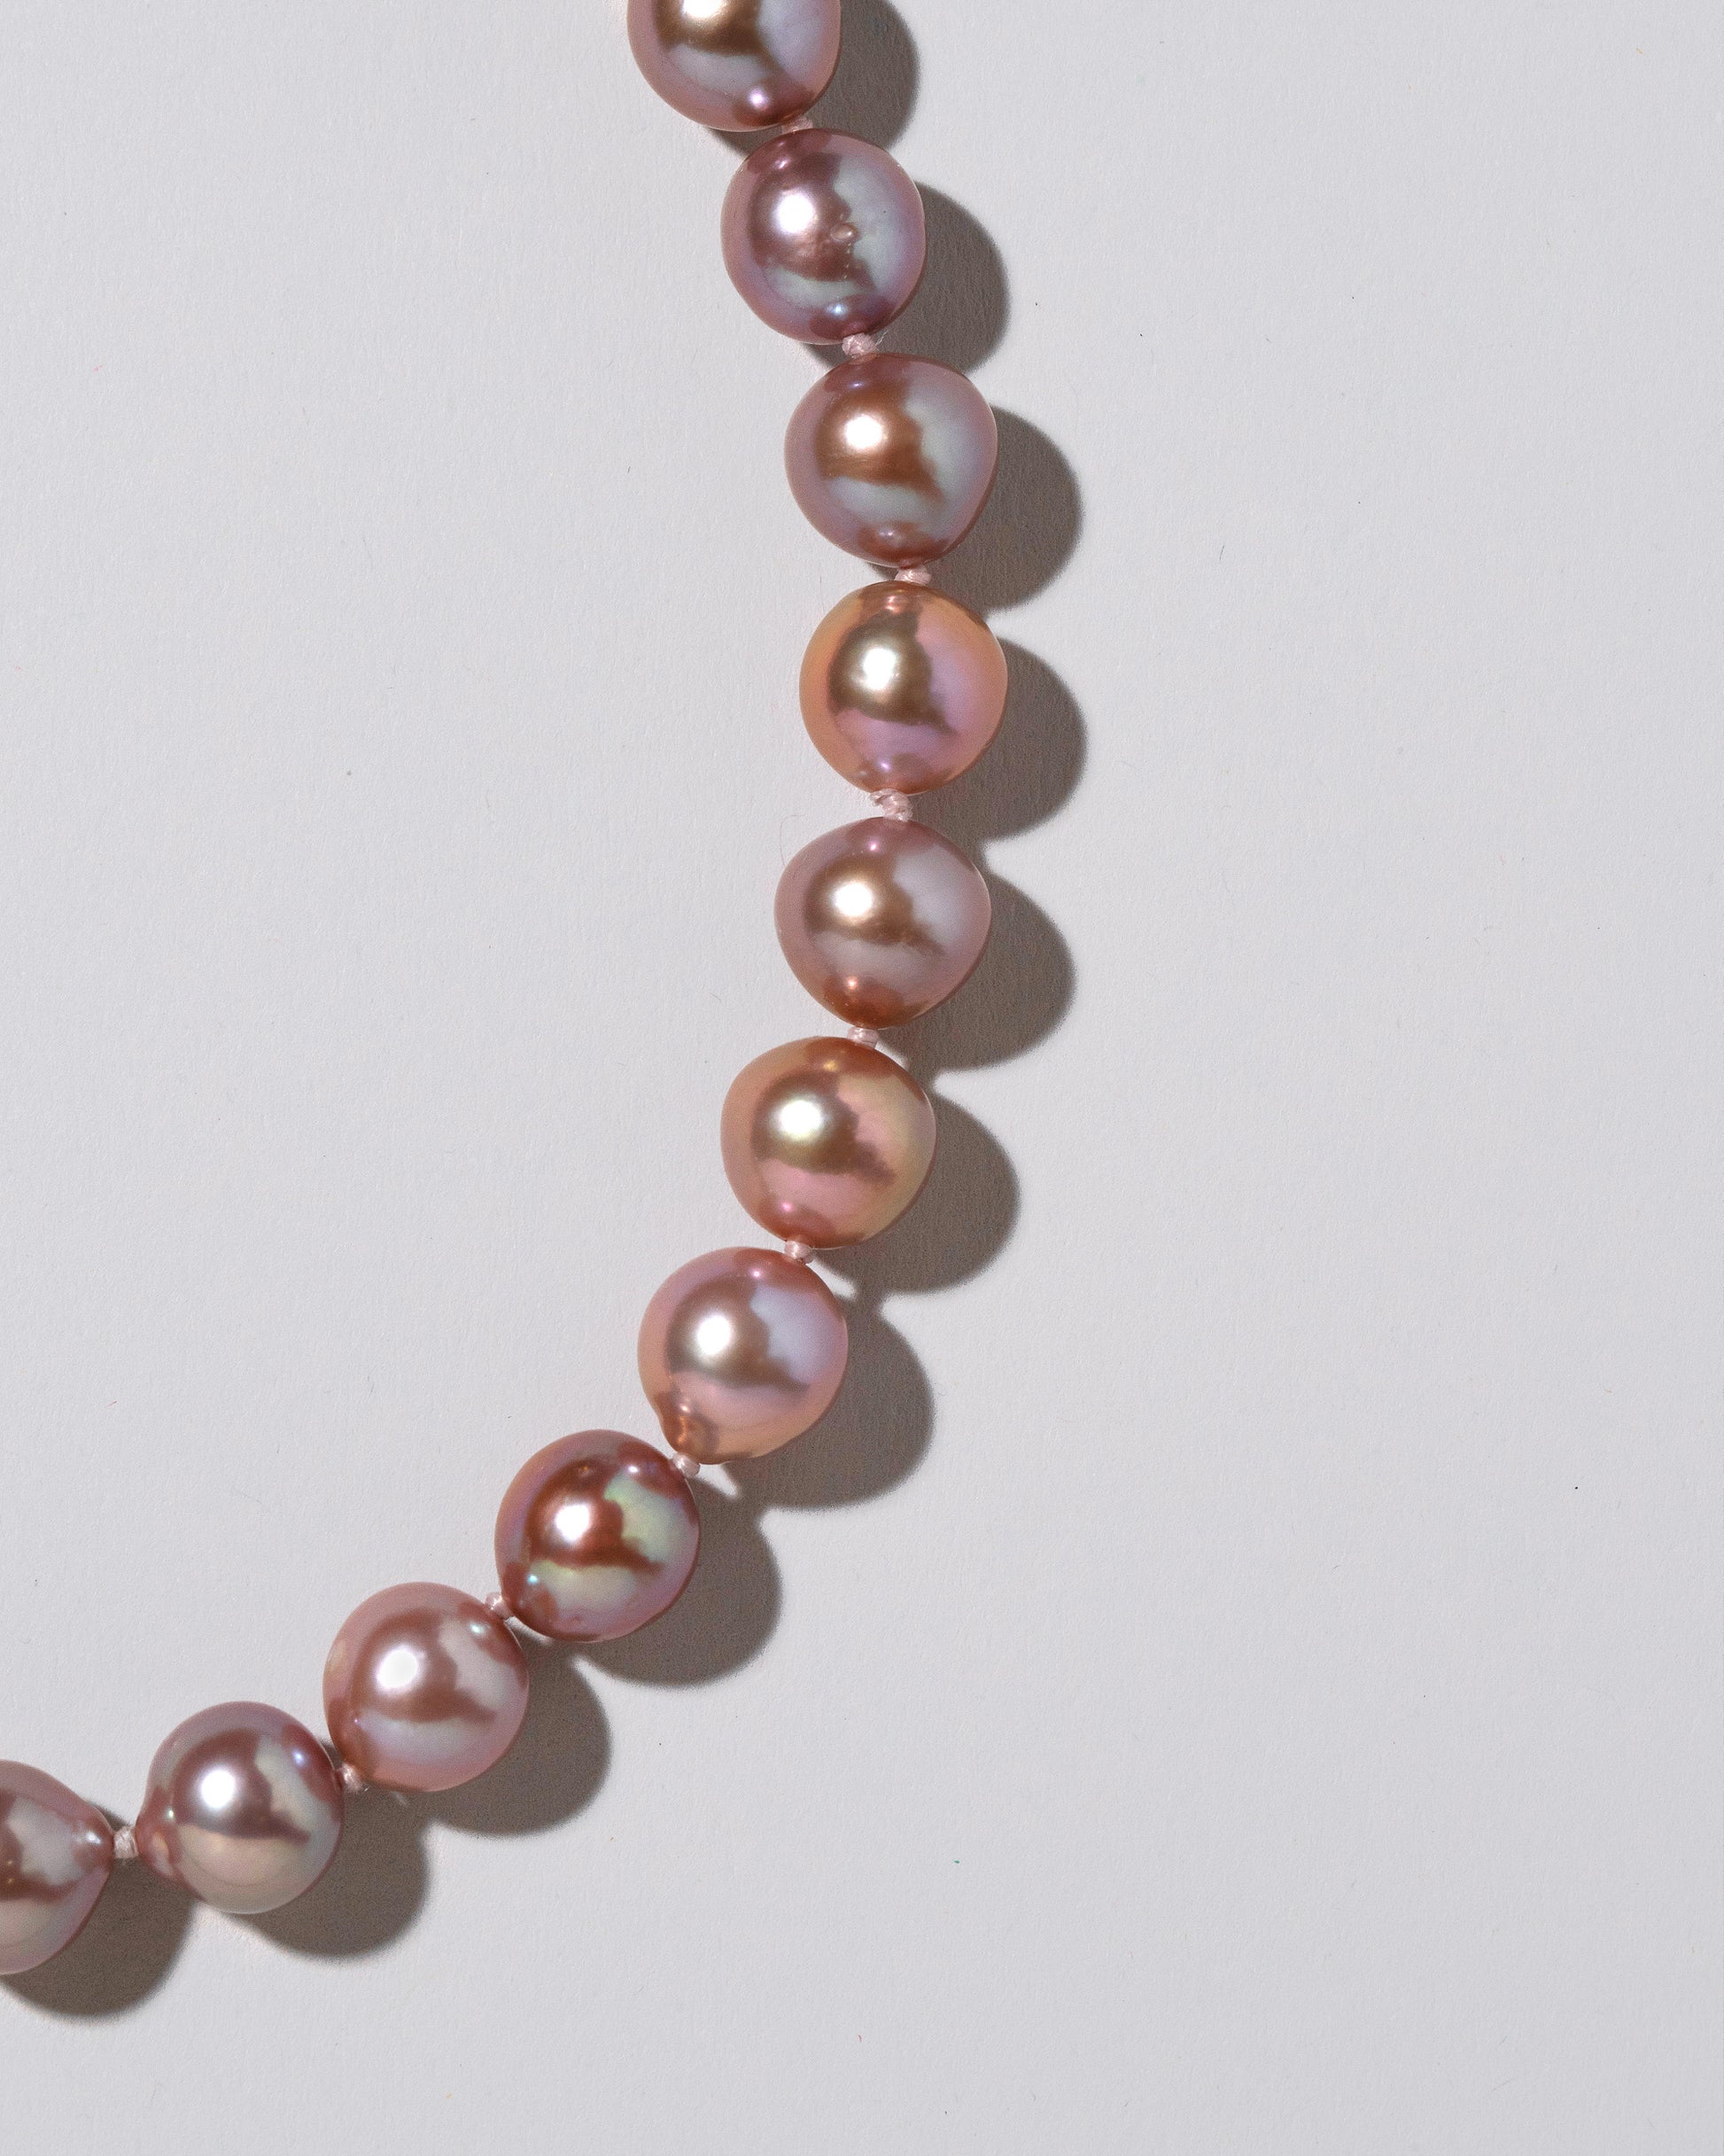 Cormorant Pearl Necklace on light color background.